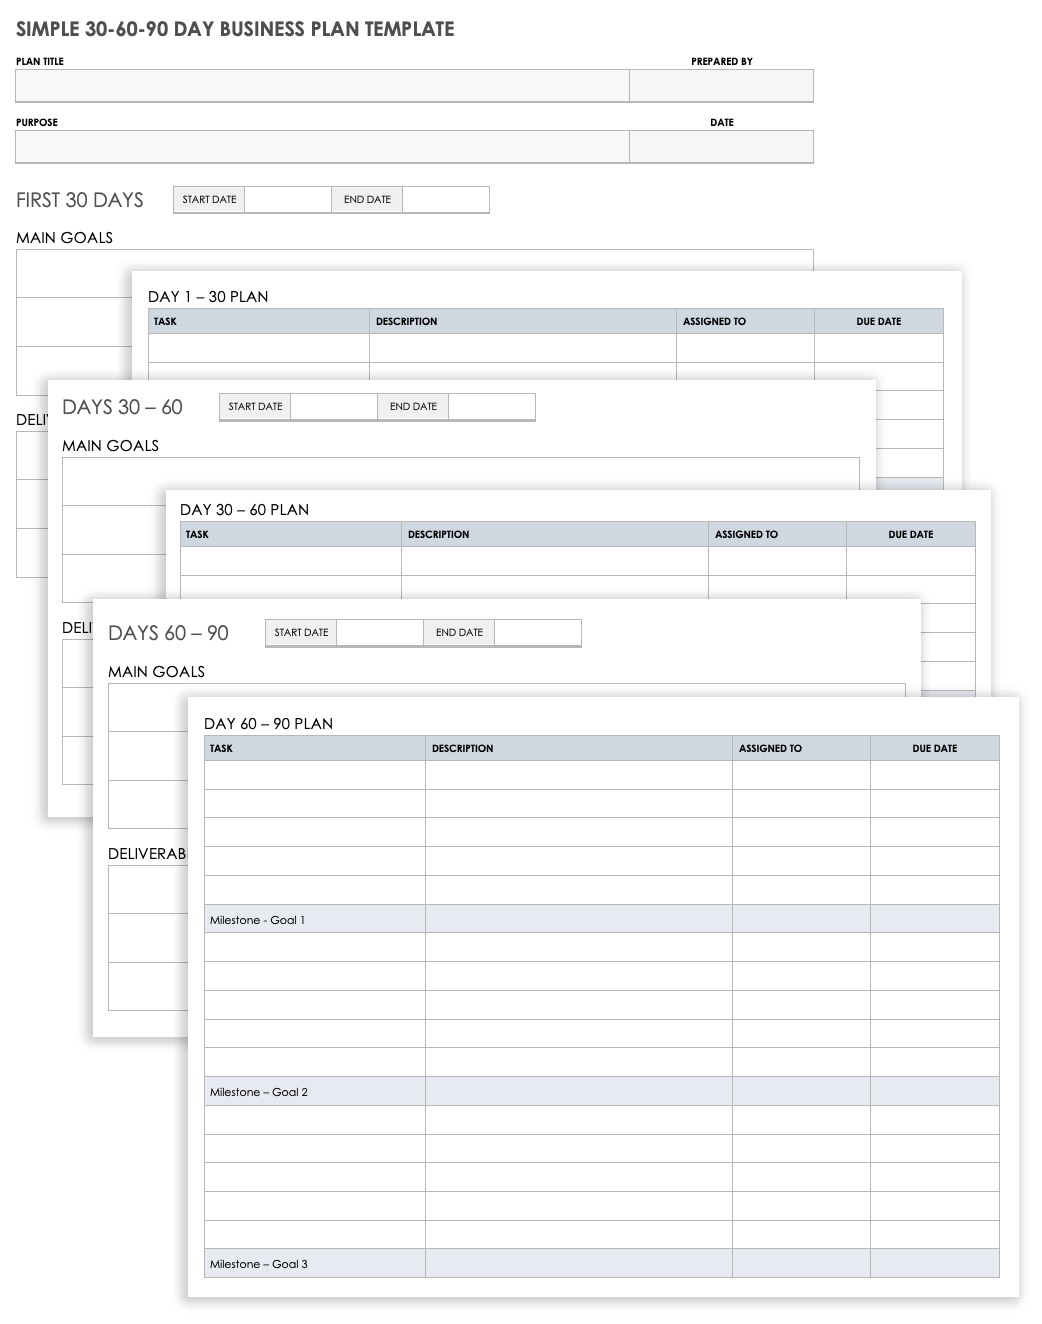 Free 22-22-22-Day Business Plan Templates  Smartsheet In Interview Business Plan Template